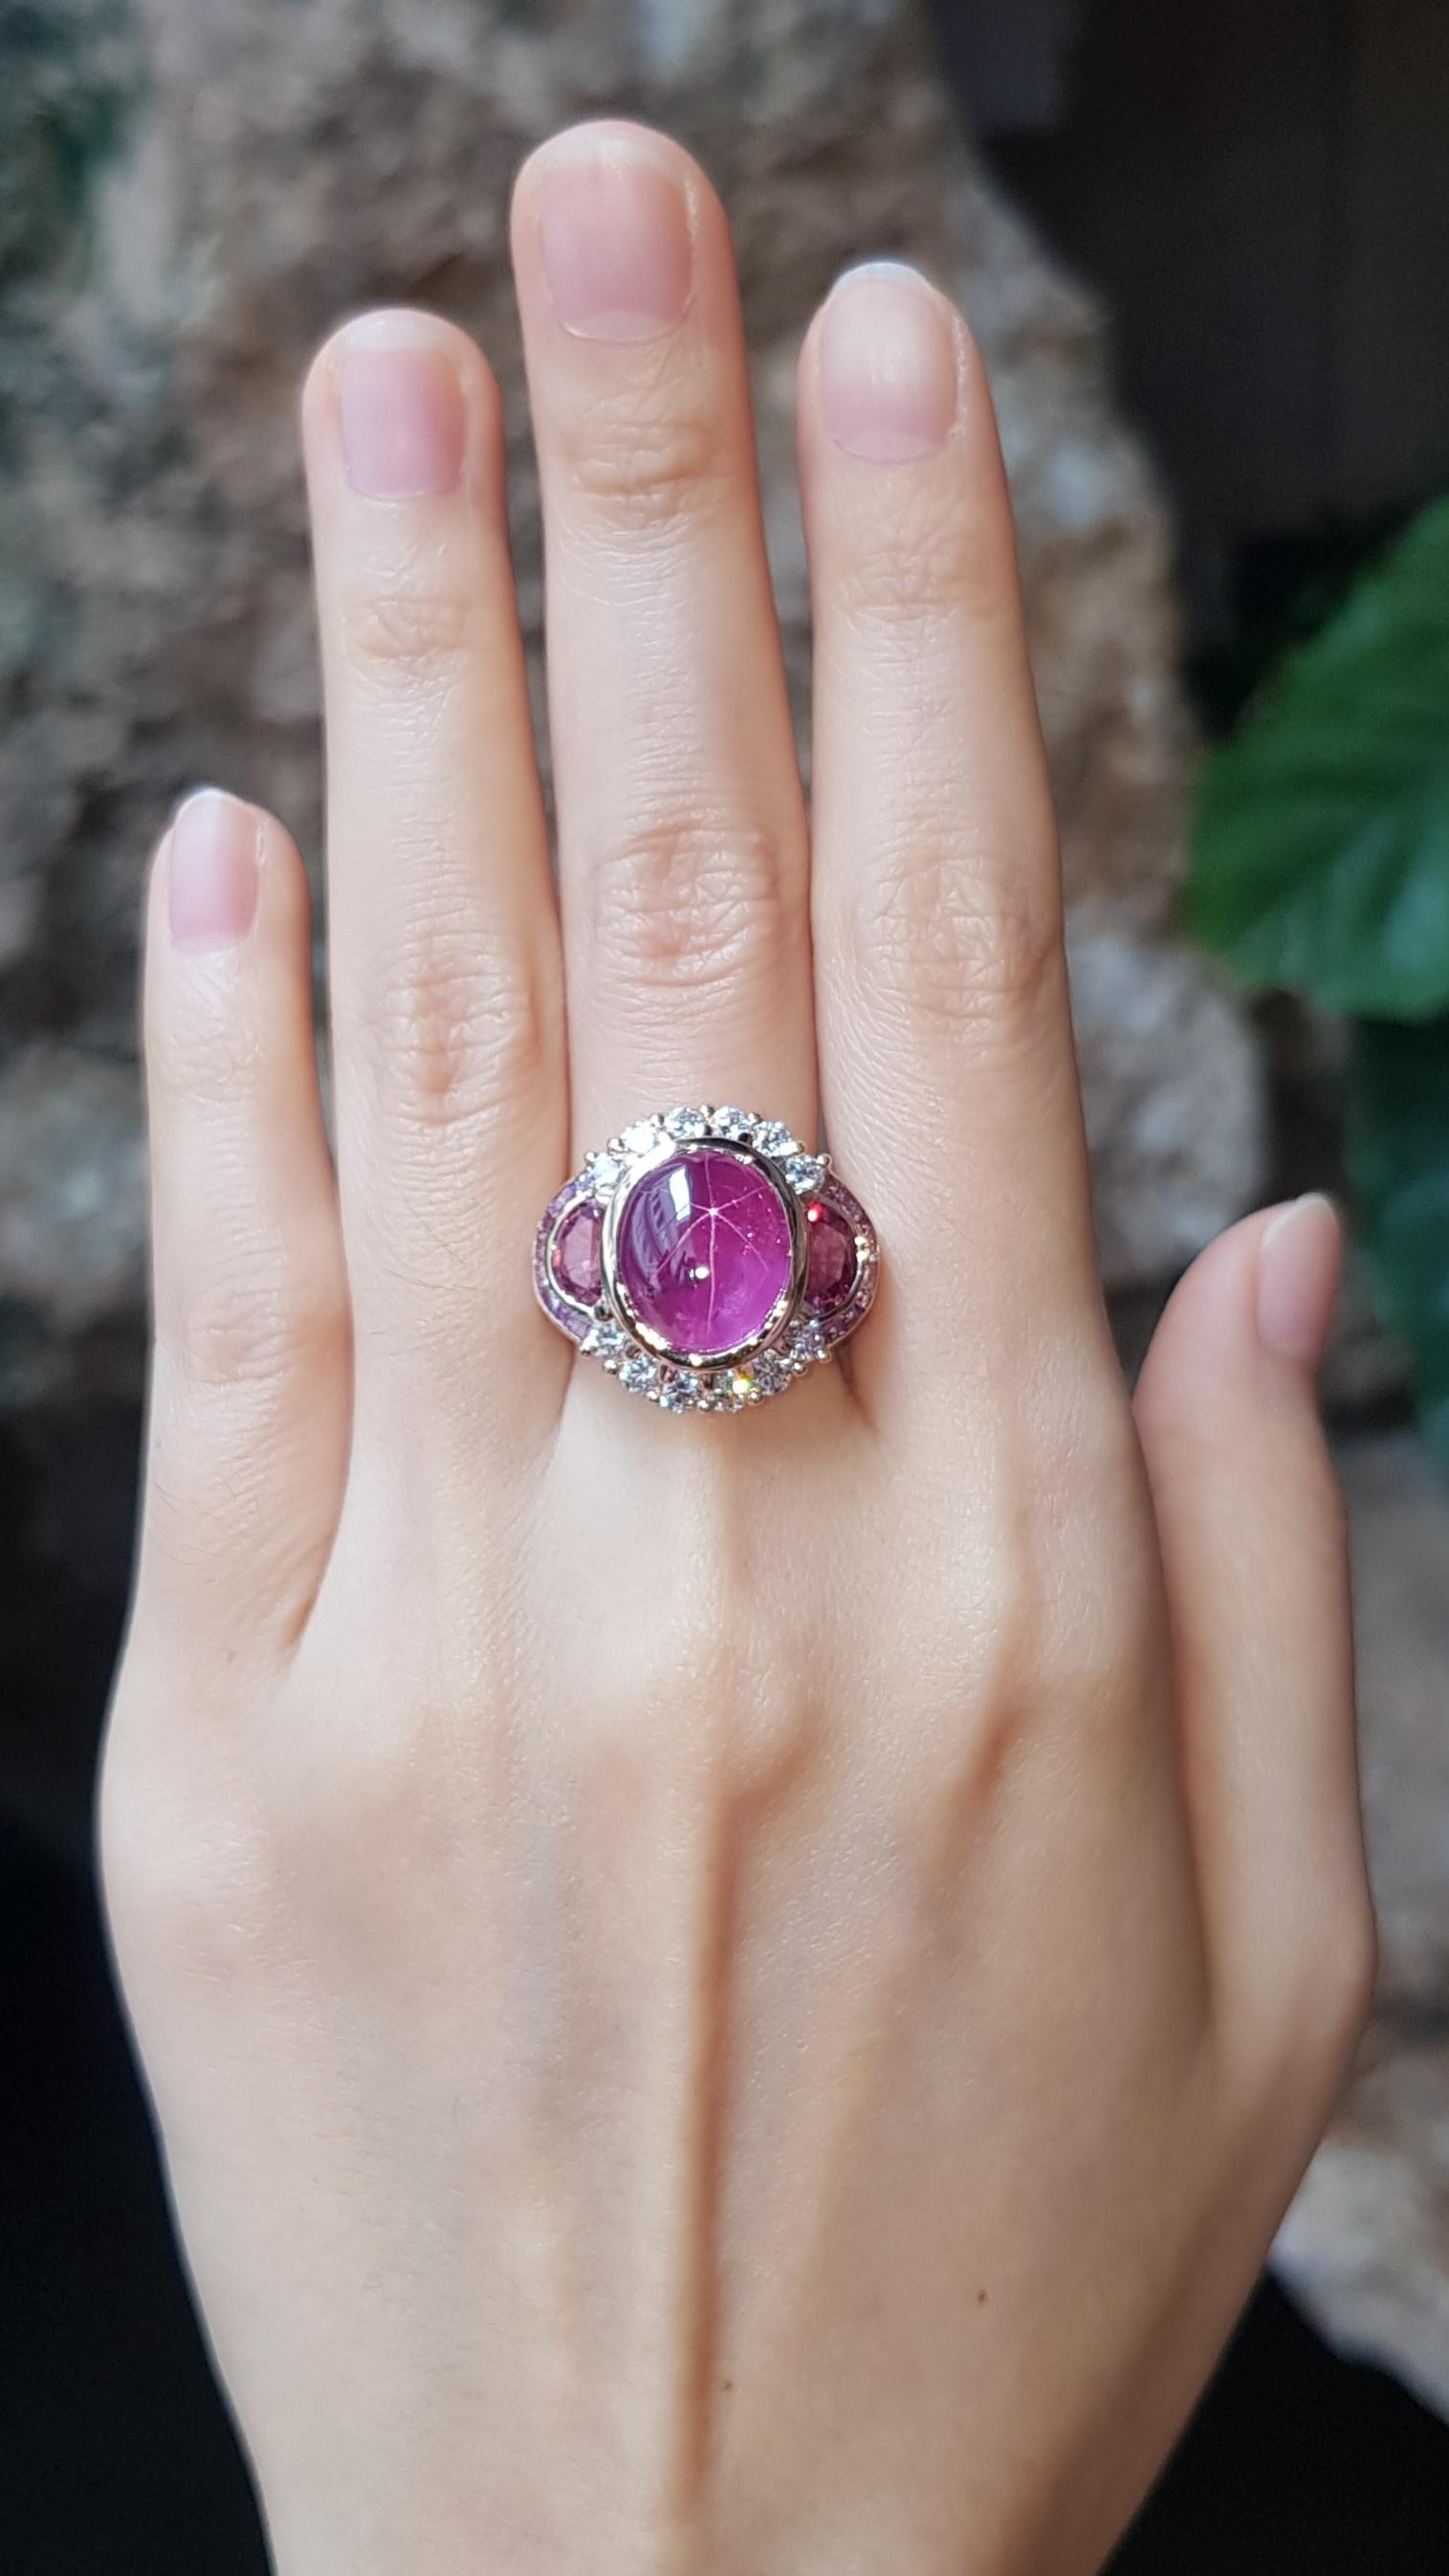 Star Ruby 11.24 carats, Pink Sapphire 1.74 carats, Purple Sapphire 2.29 carats and Diamond 0.92 carat Ring set in 18 Karat Rose Gold Settings
(GIA Certified)

Width:  2.0 cm 
Length: 2.0 cm
Ring Size: 60
Total Weight: 13.58 grams


